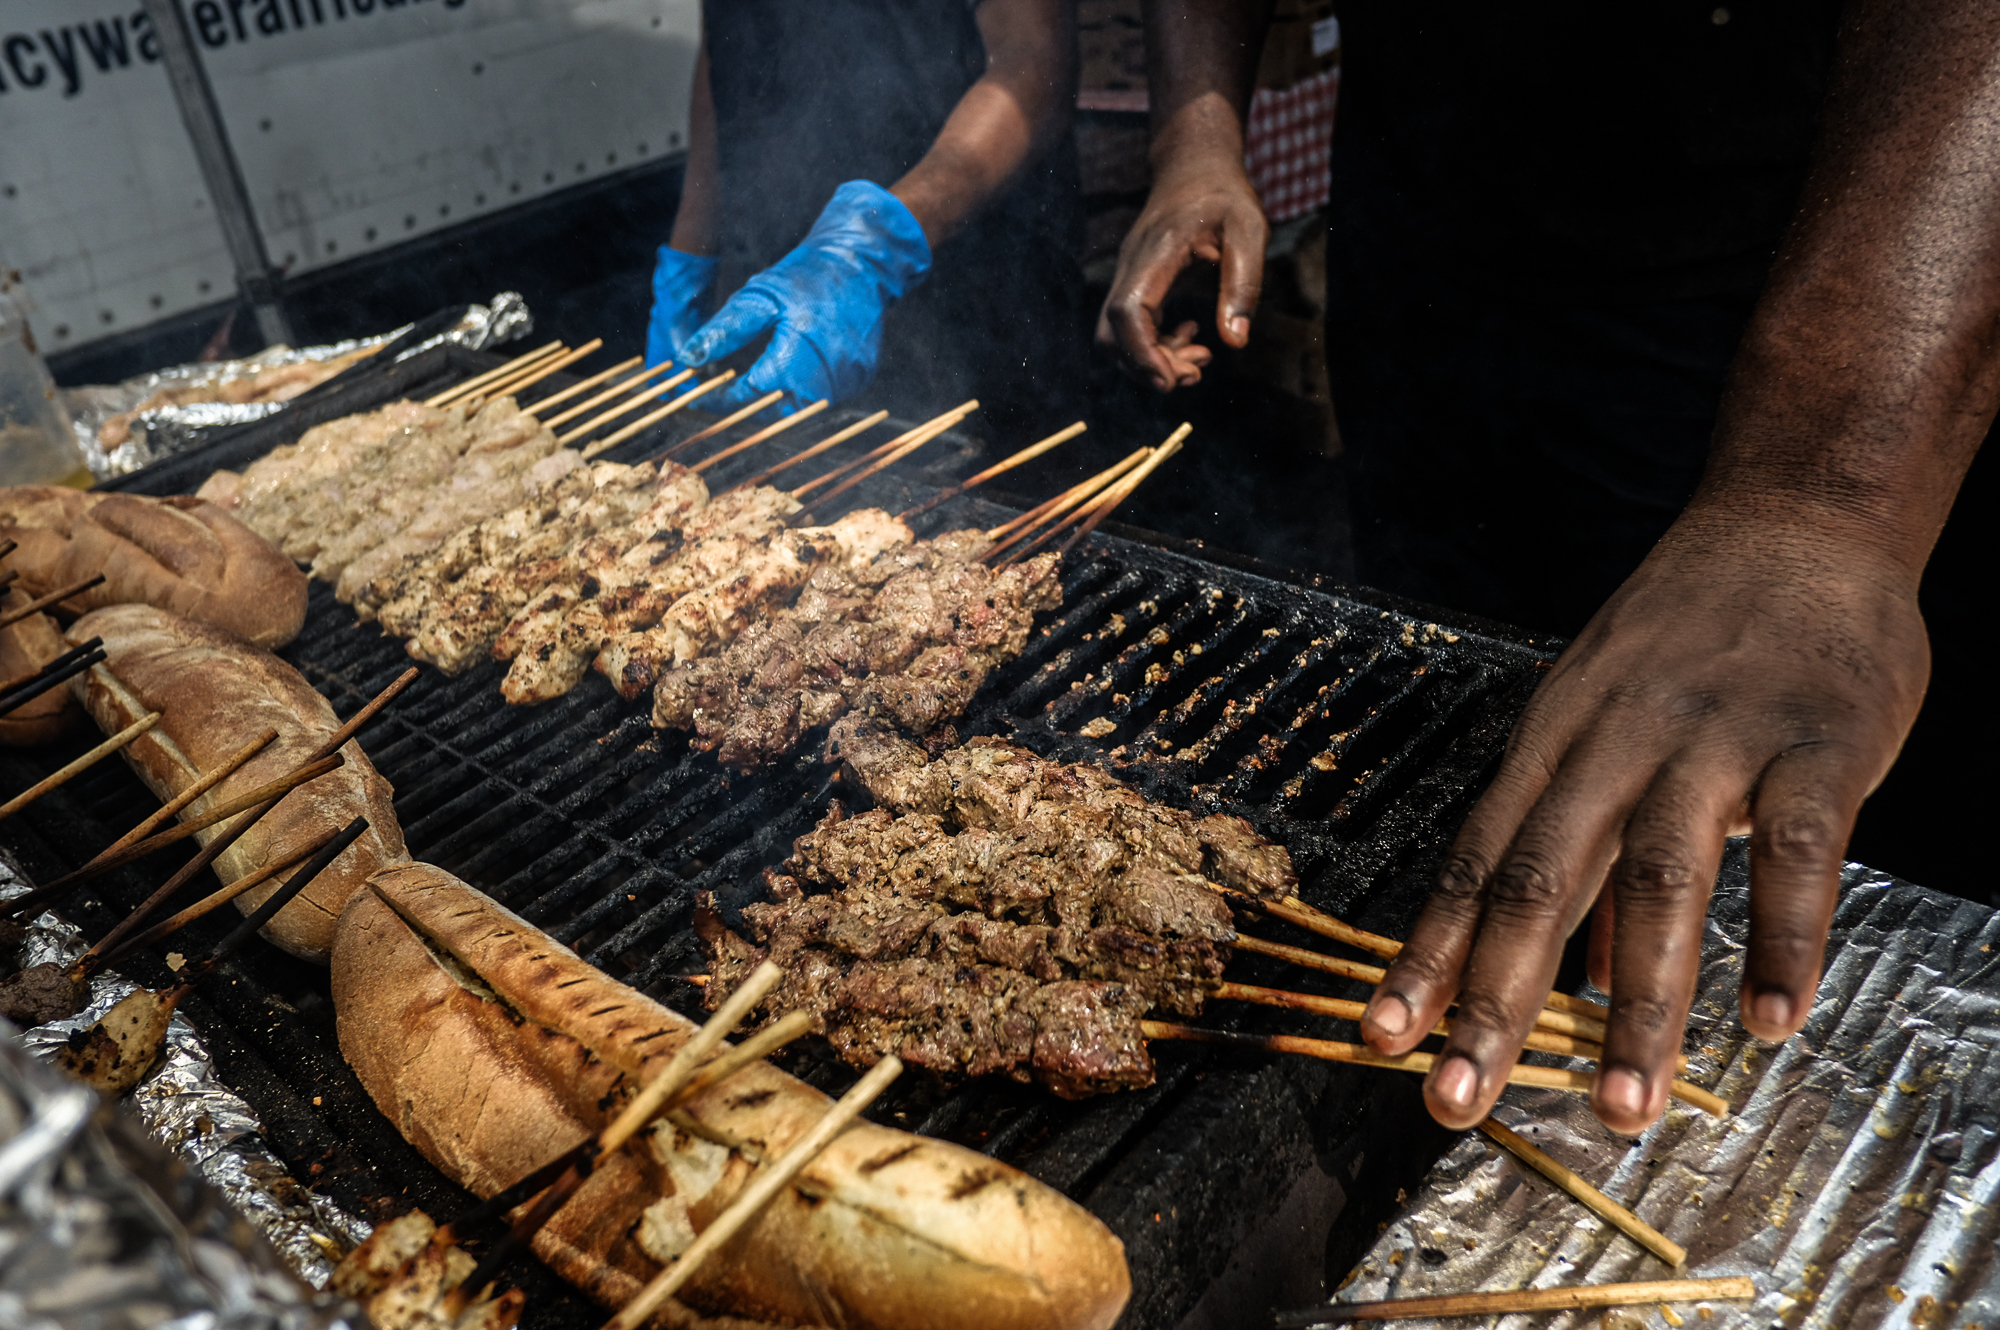 Skewered meats on the grill at Spicy Water near Eastern Market in Washington, D.C.